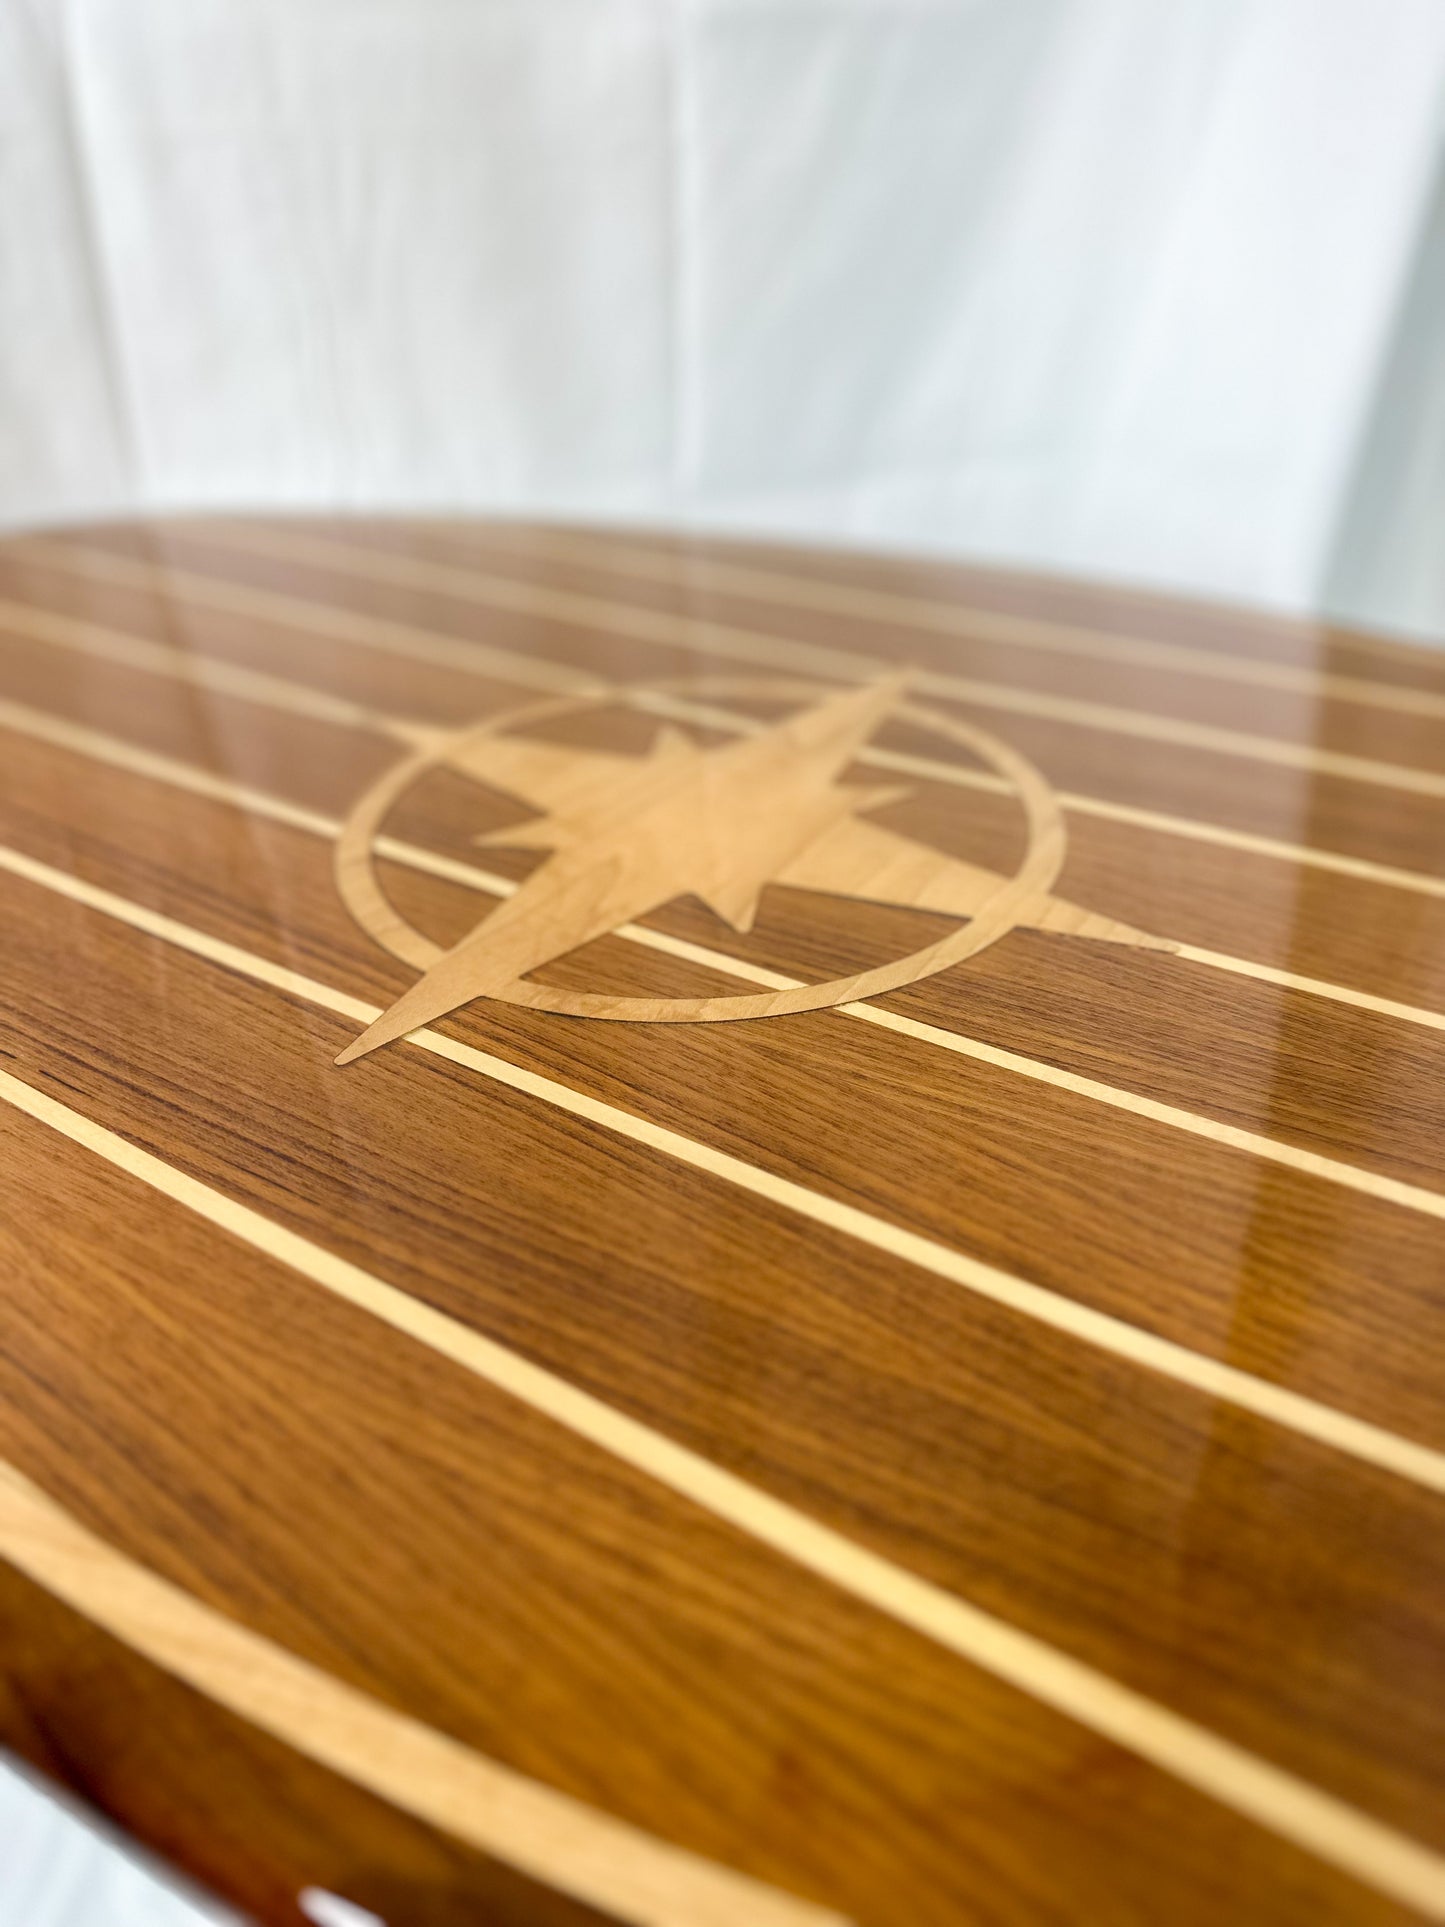 23" x 43" Teak and Holly Oval Table with Maple Compass Rose